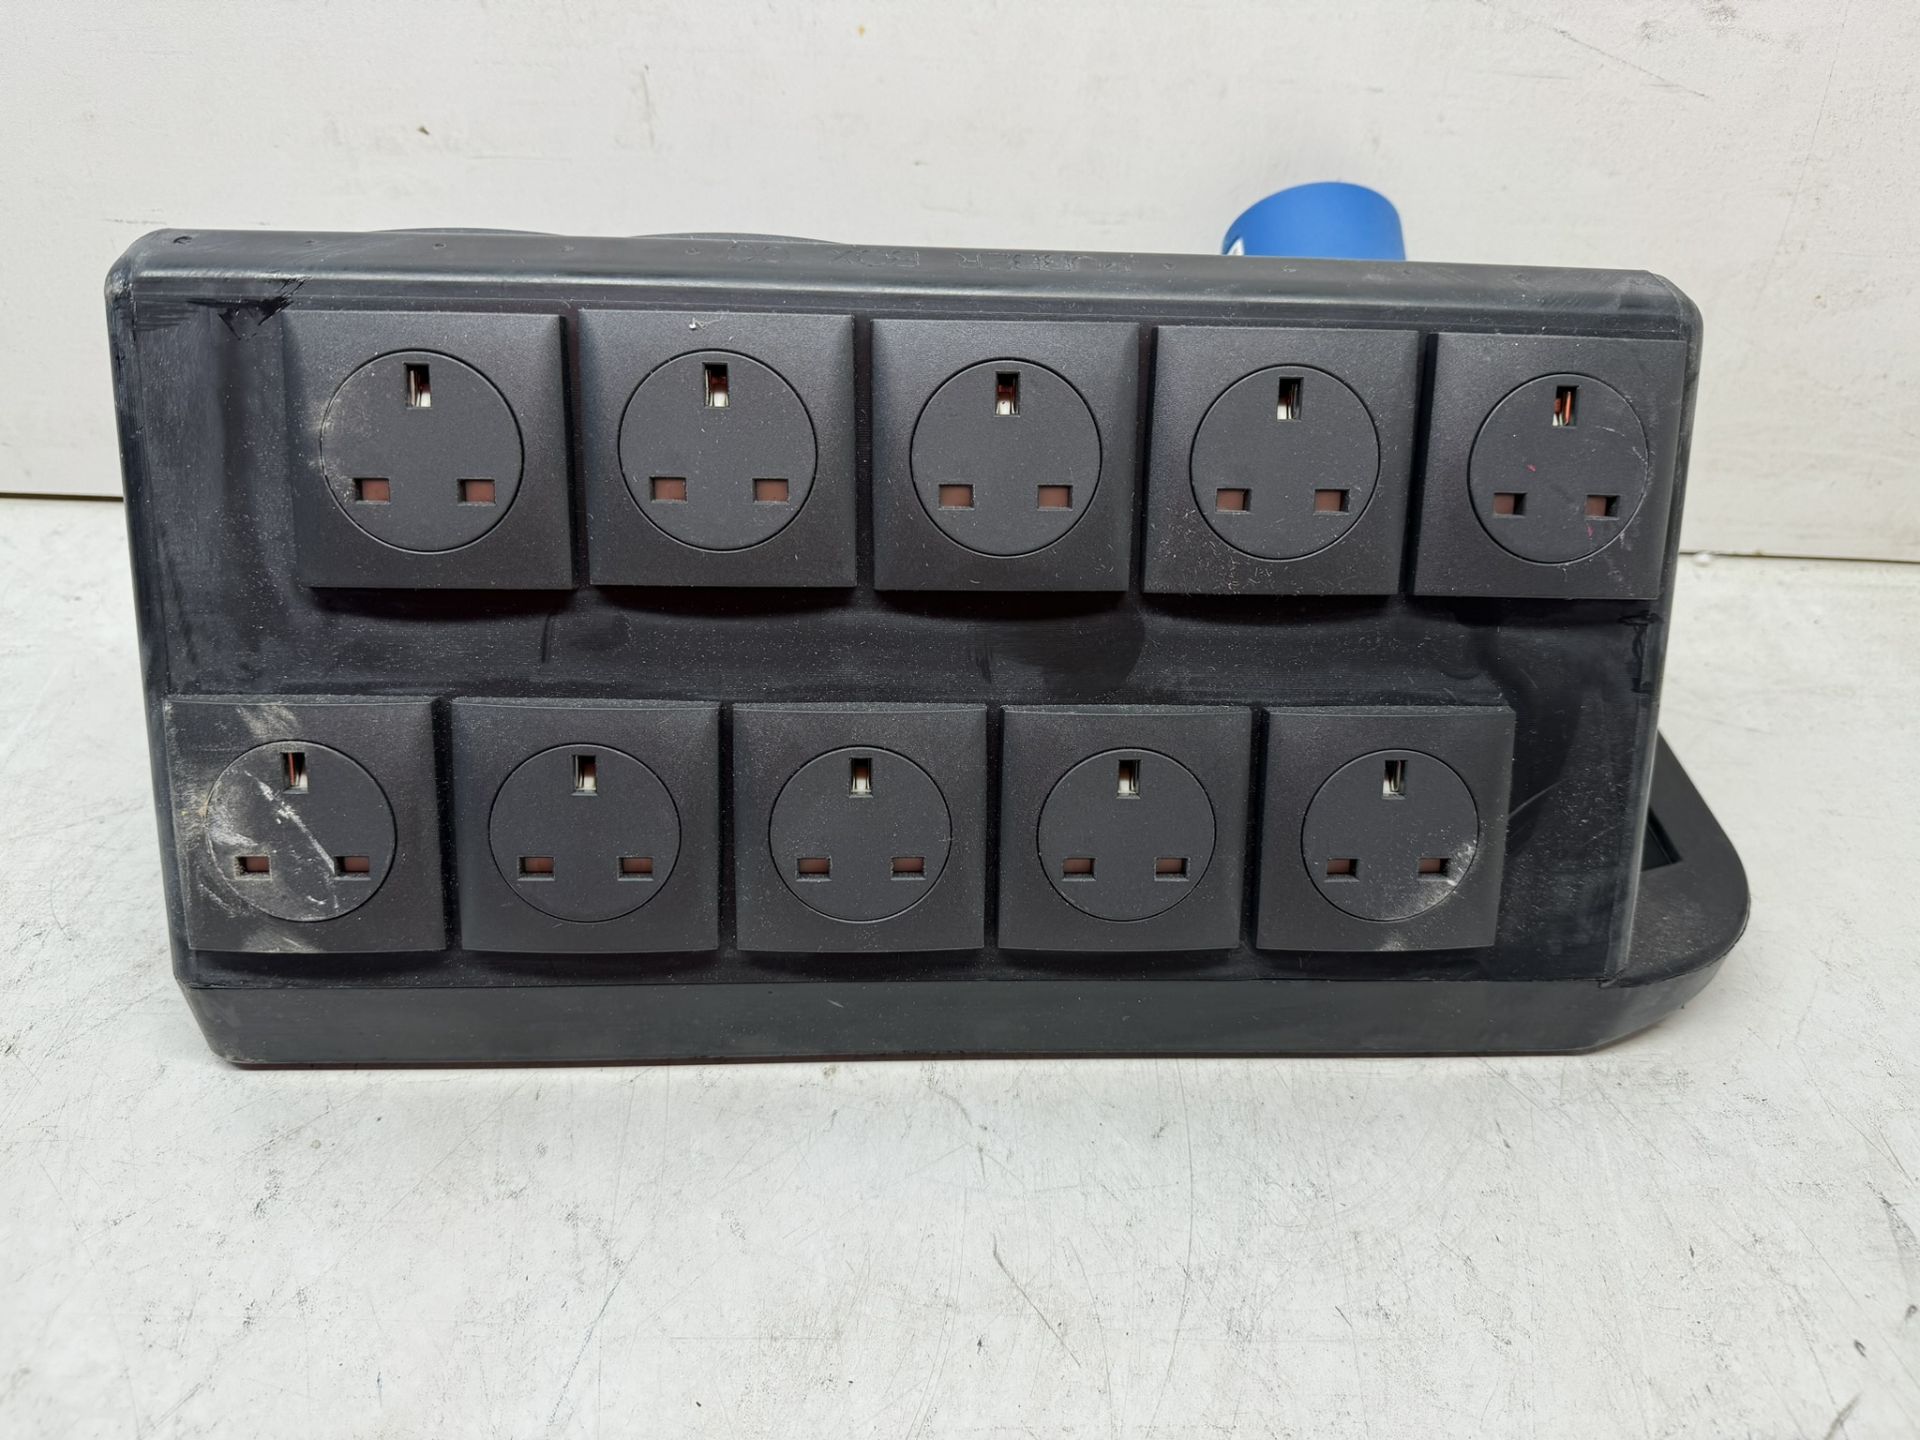 Rubber Box Triangle power distribution Box f/w: 16A 240v In & Out to 14 x 13A 240v Sockets - Image 2 of 4